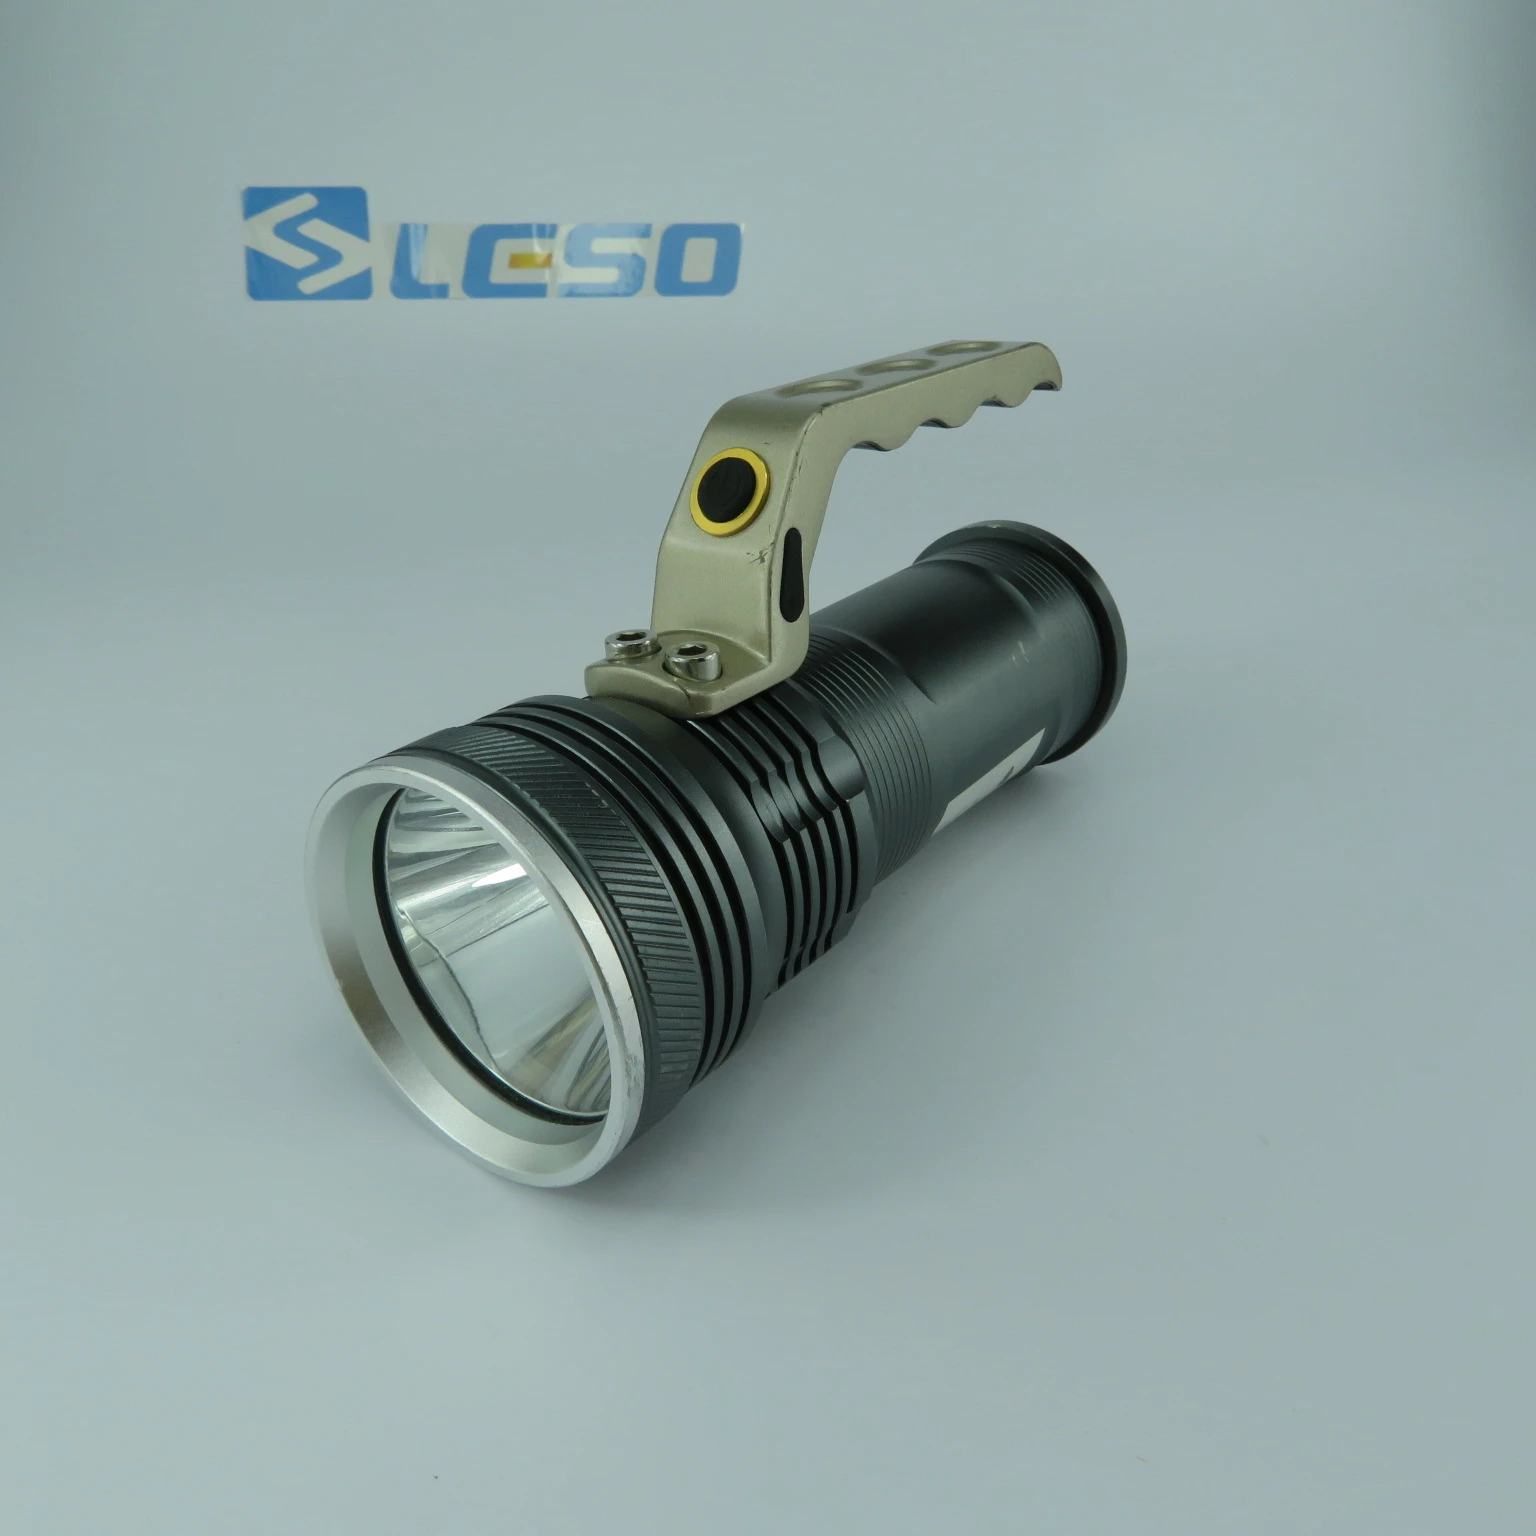 Hand-held portable Wholesale high quality aluminum torch light flashlight torch